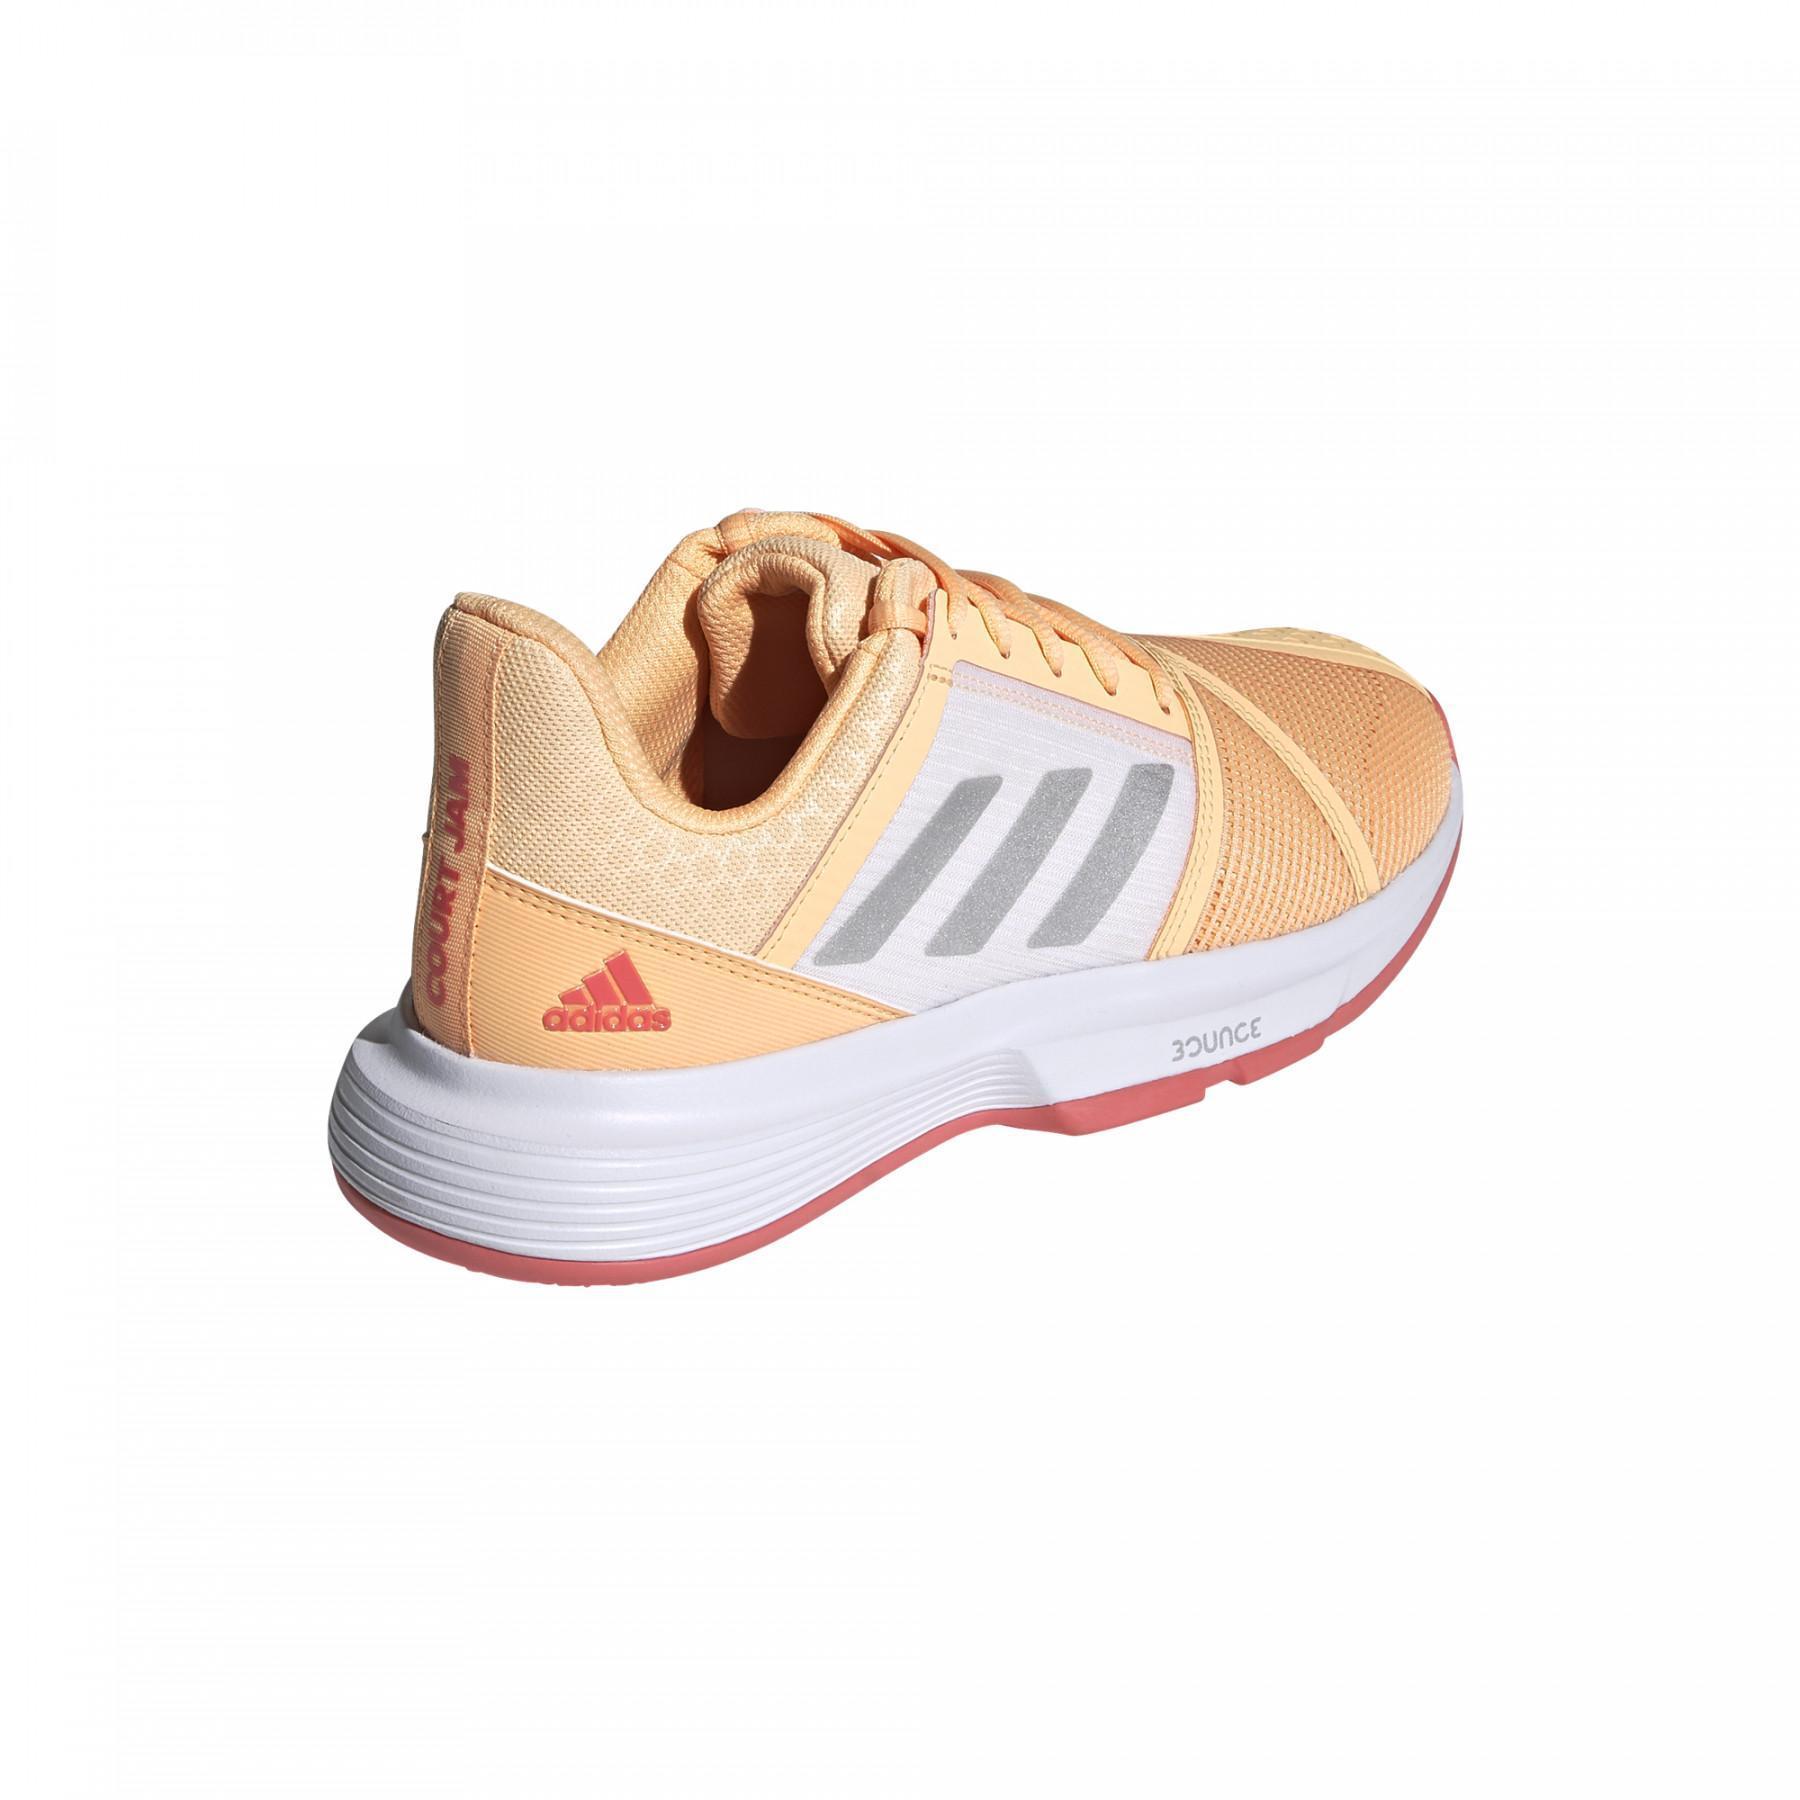 Women's shoes adidas CourtJam Bounce